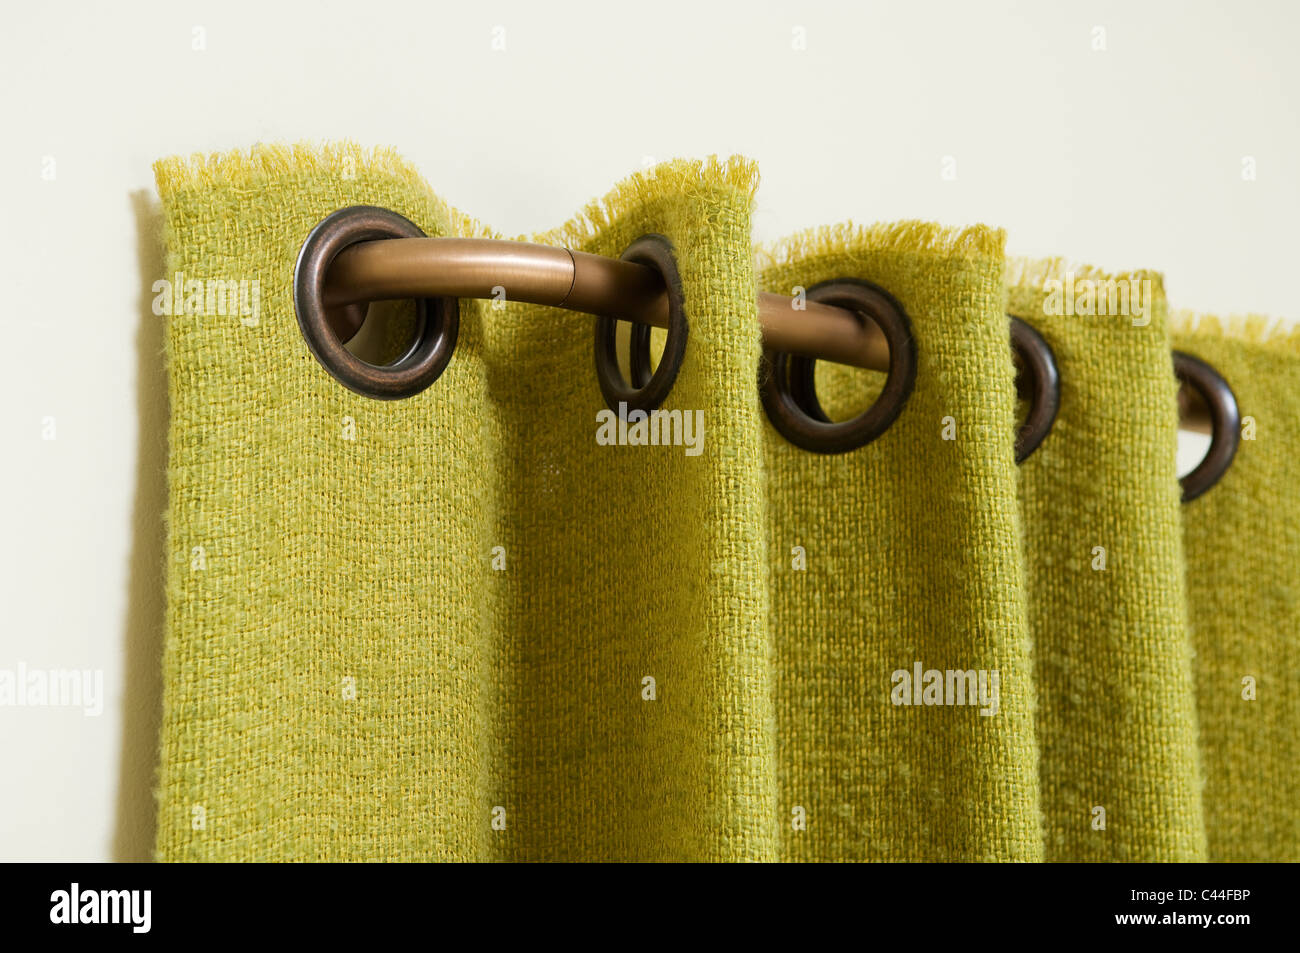 detail of a green curtain with eyelets, hooked on to a curved brass curtain rail Stock Photo